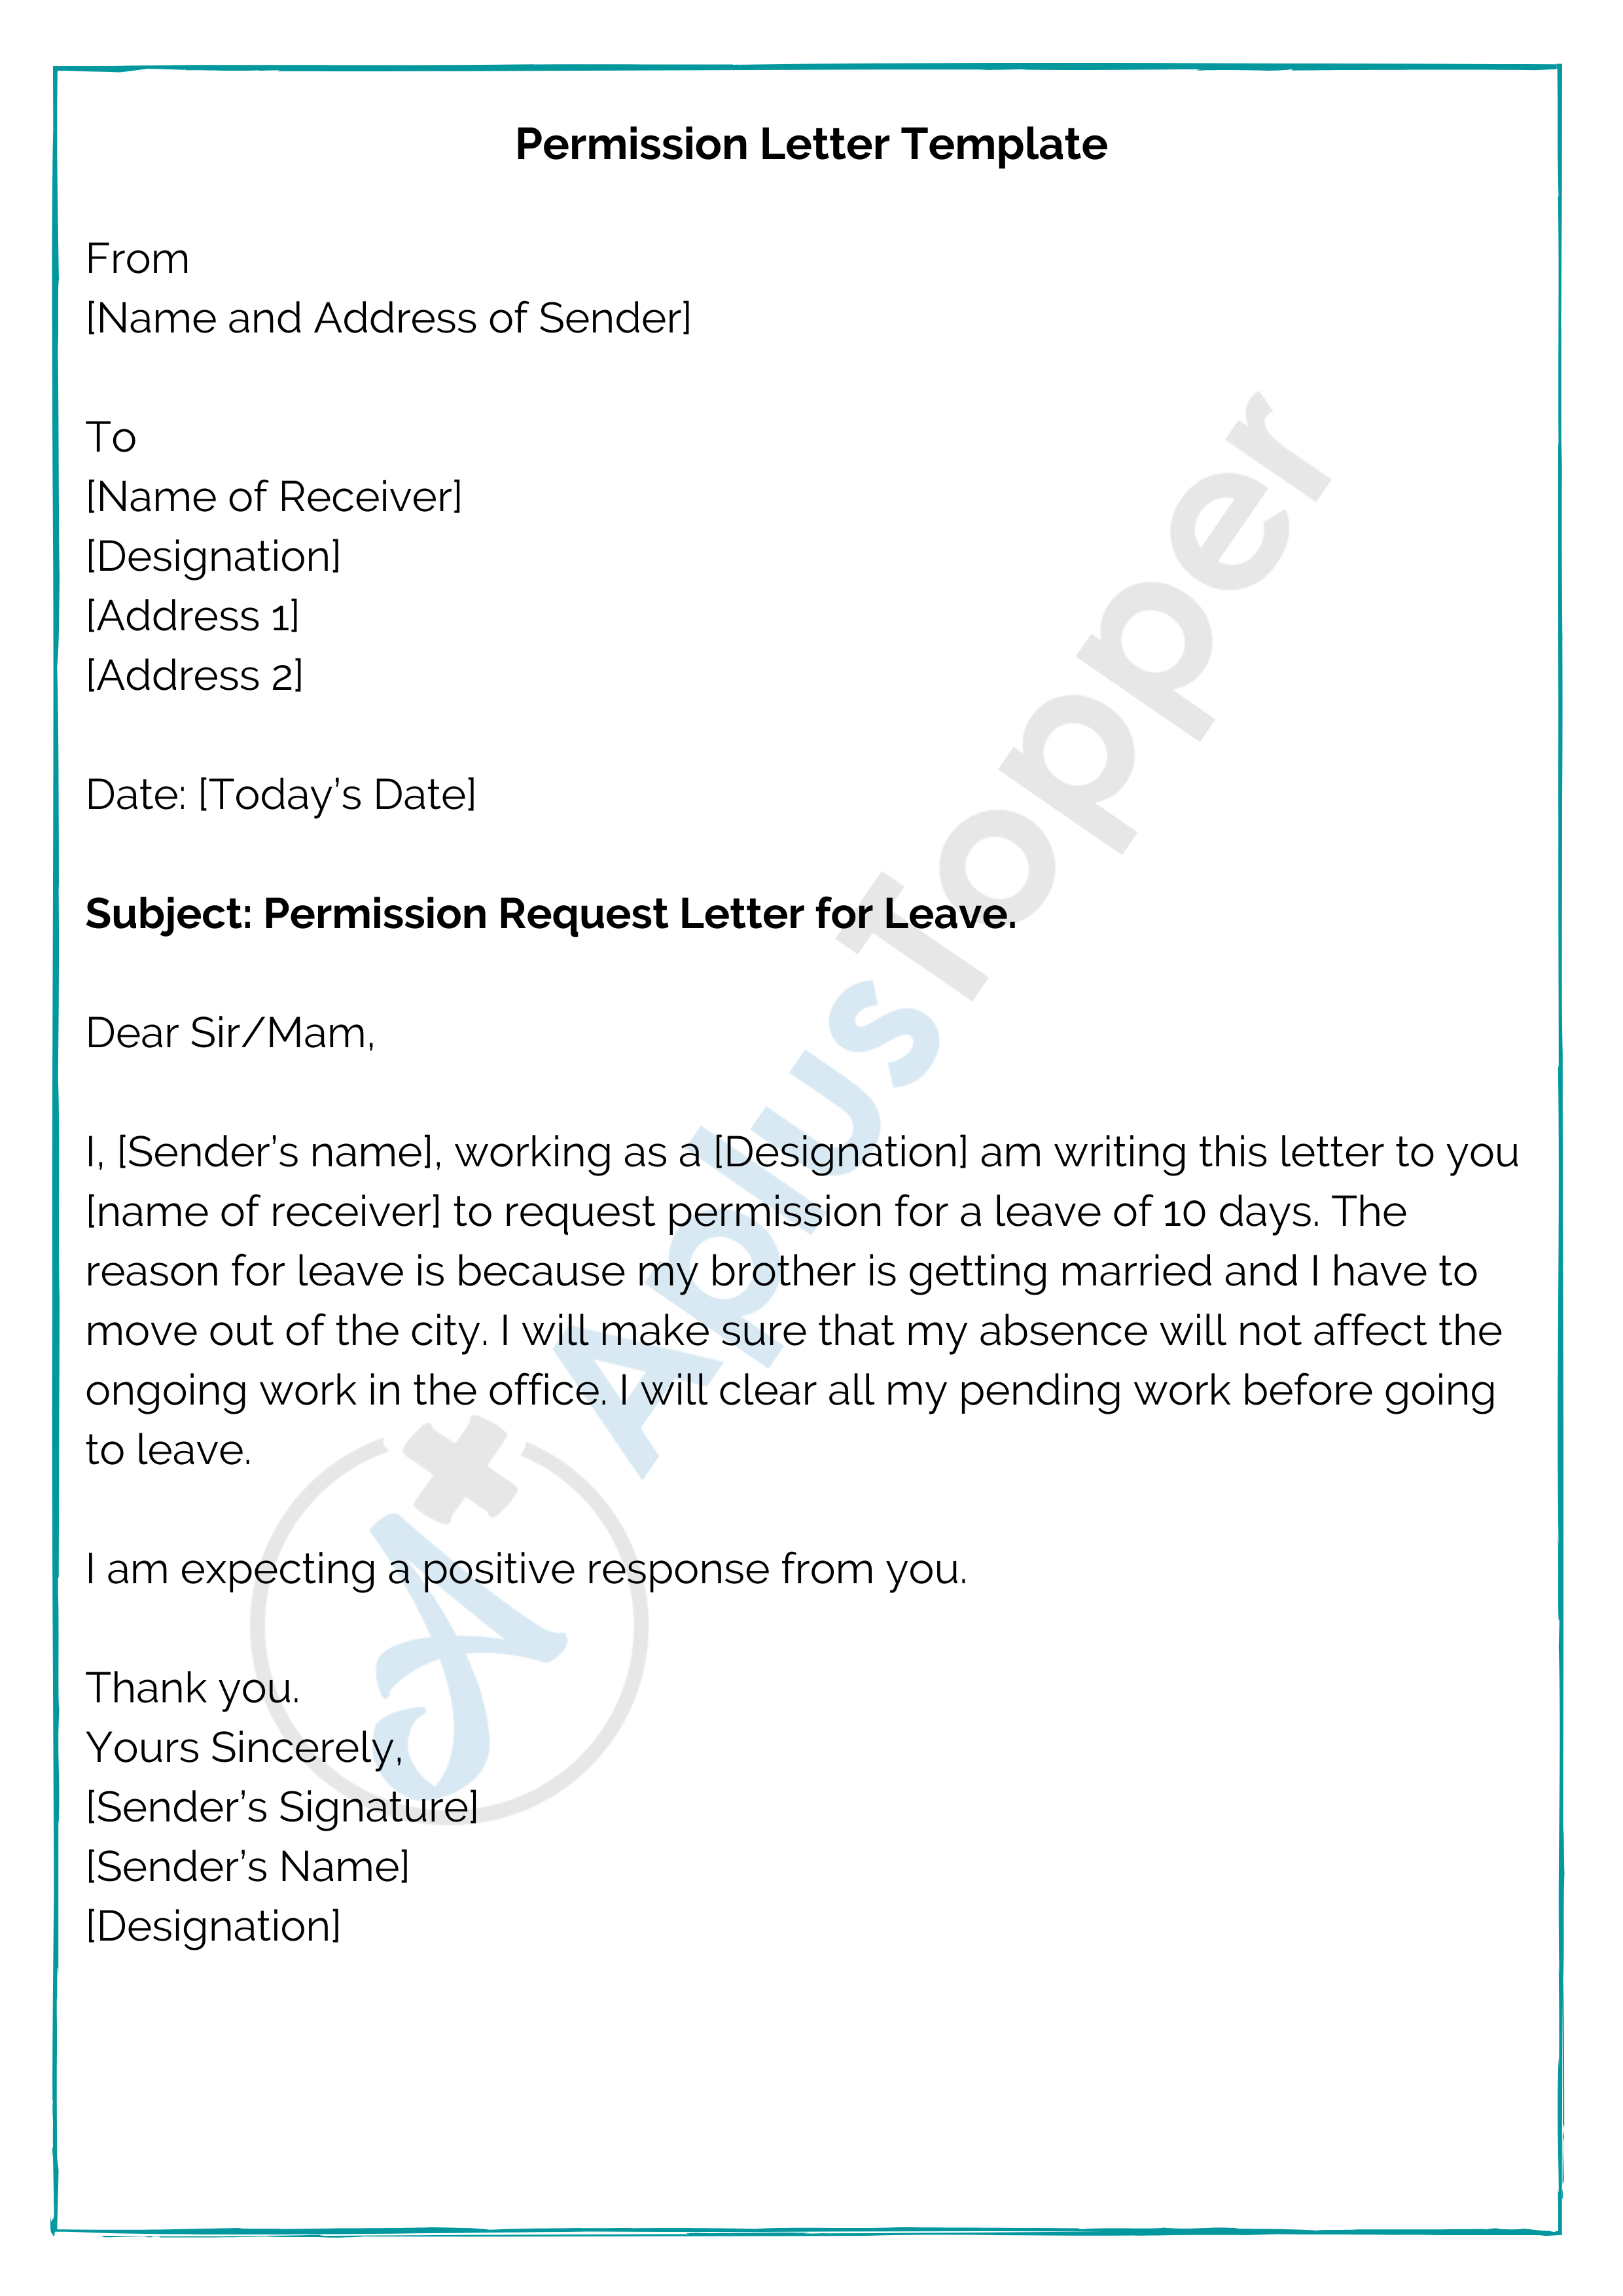 how to write a letter asking for permission